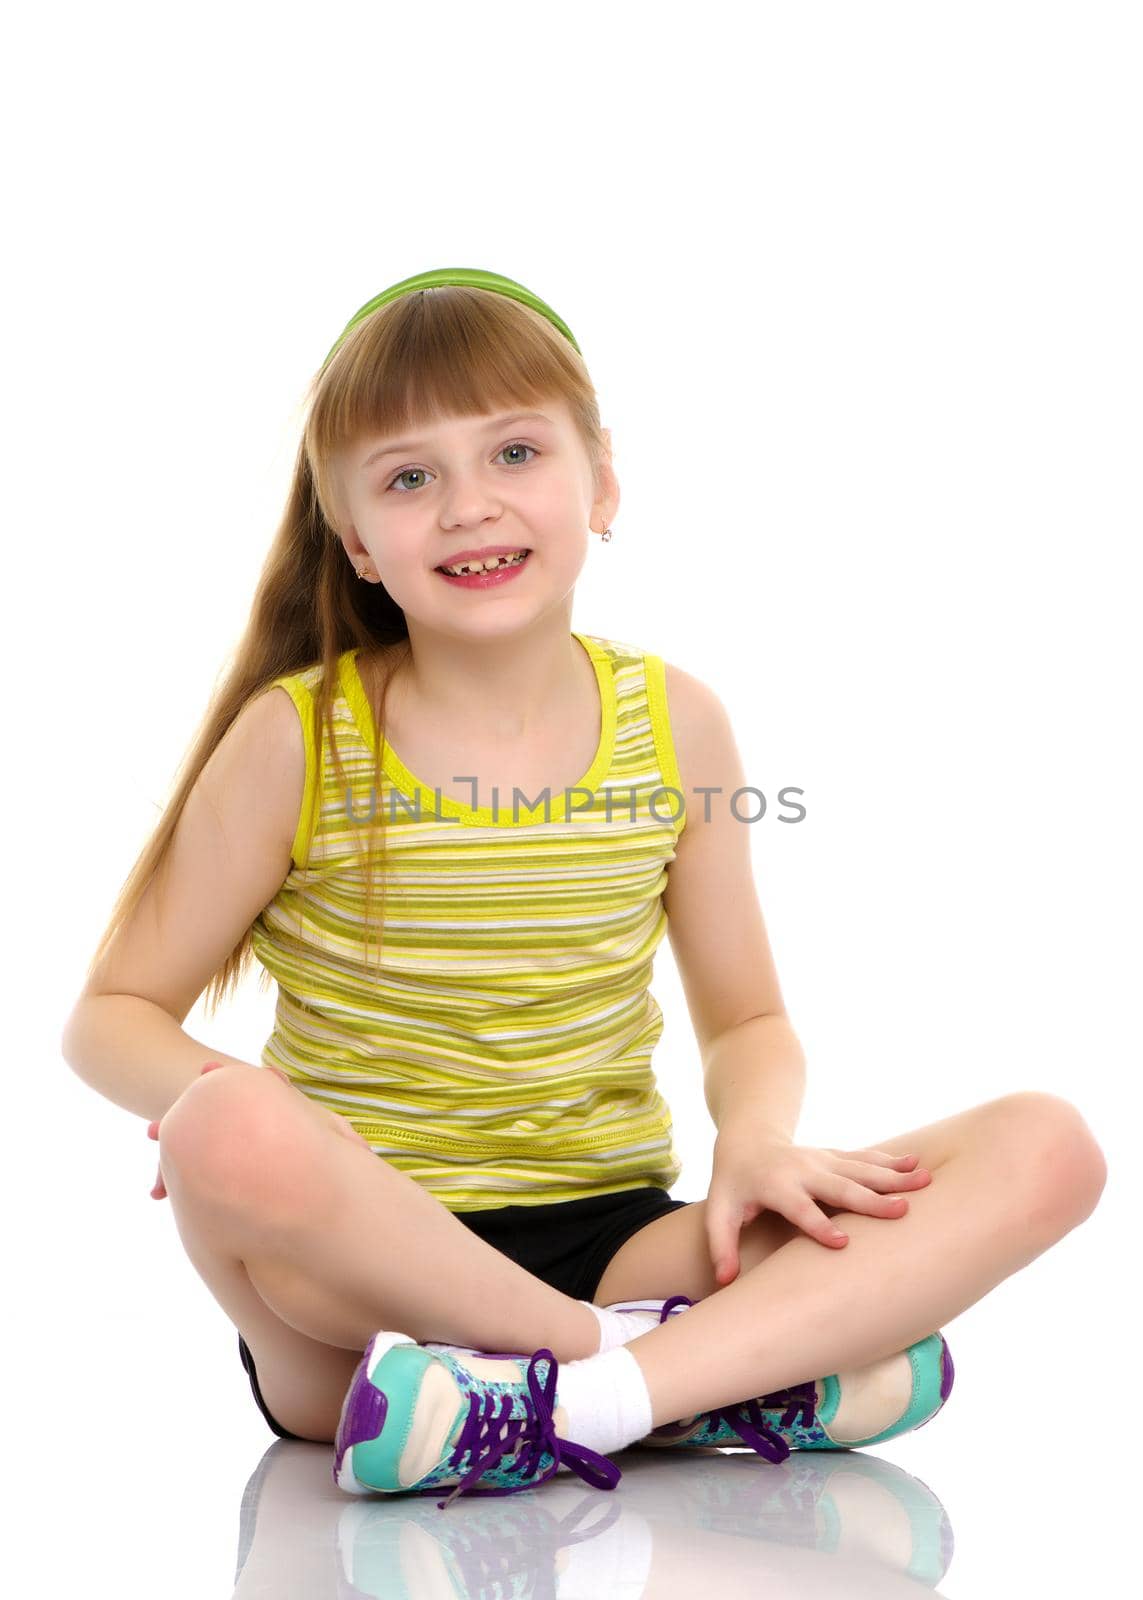 The gymnast perform an acrobatic element on the floor.A girl gymnast performs an acrobatic element on the floor. The concept of childhood, sport, healthy lifestyle. Isolated on white background.